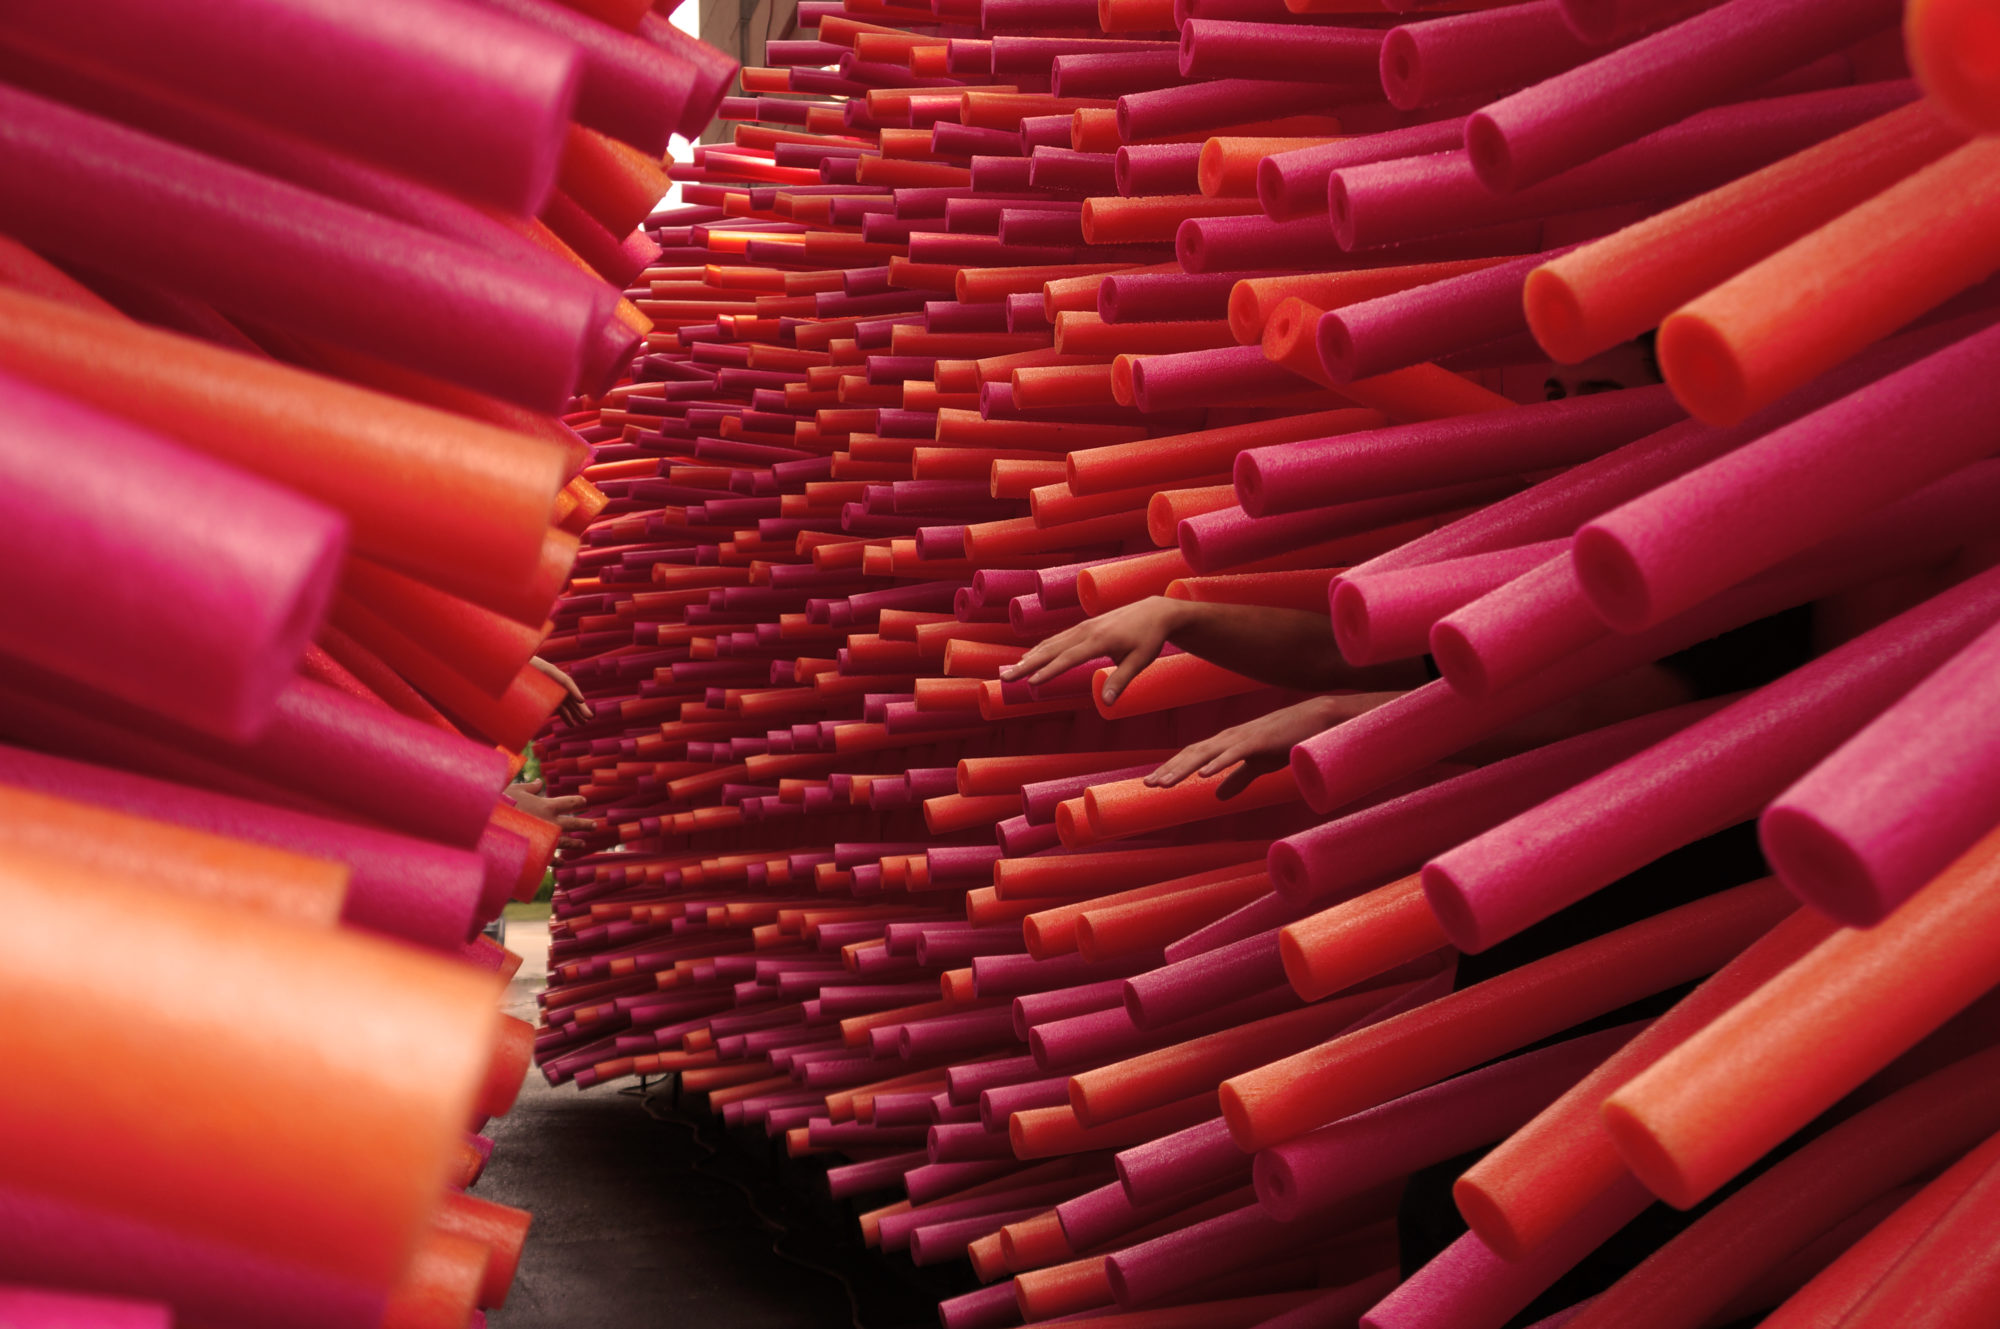 Two pairs of hands stick out of a bunch of pink and orange pool noodles